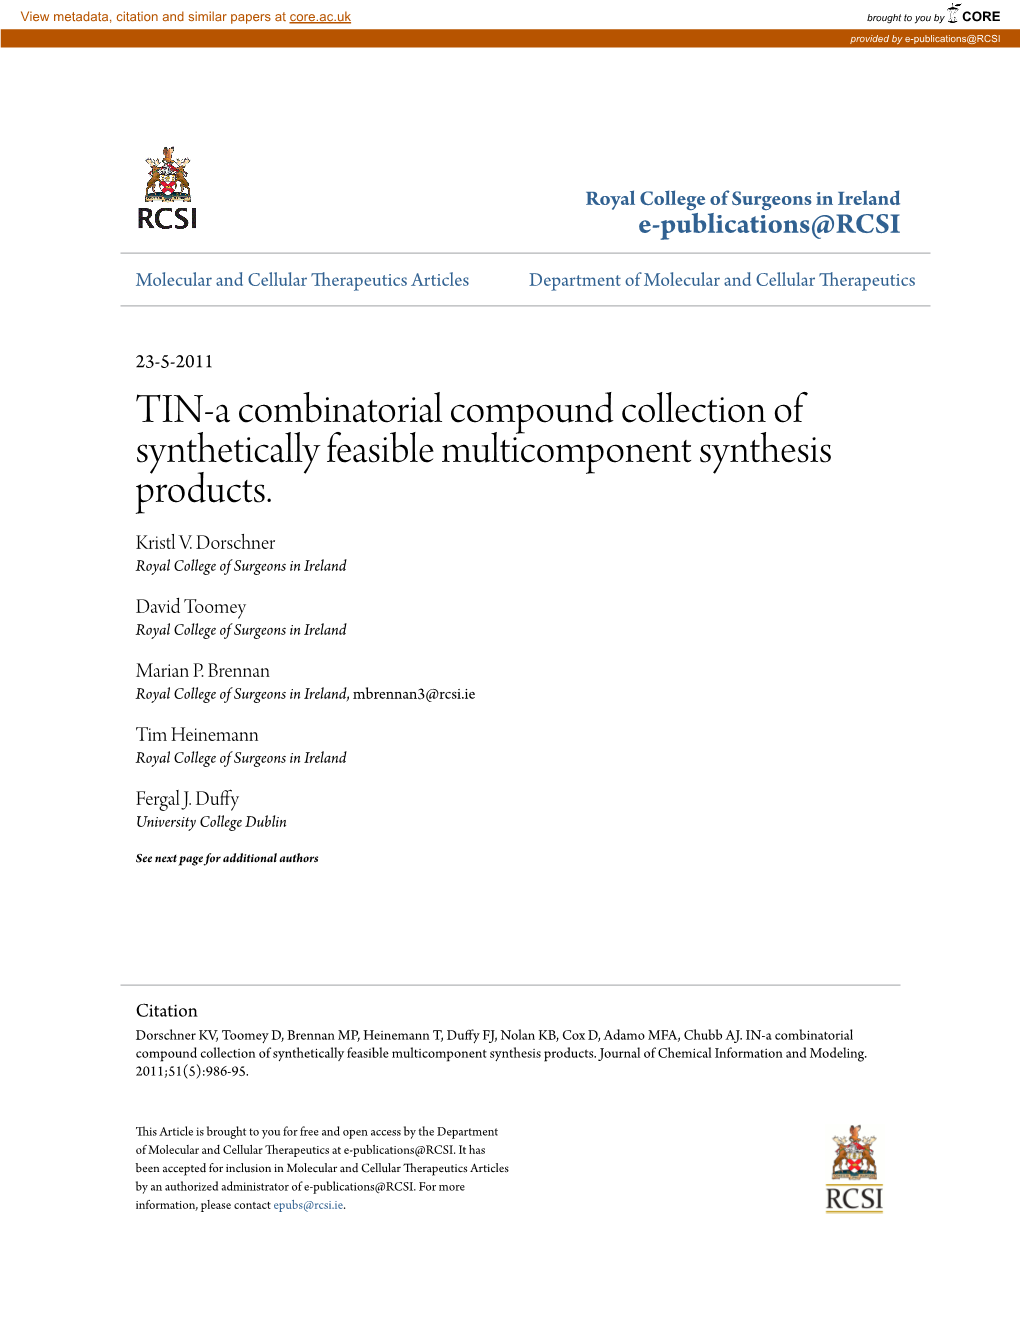 TIN-A Combinatorial Compound Collection of Synthetically Feasible Multicomponent Synthesis Products. Kristl V